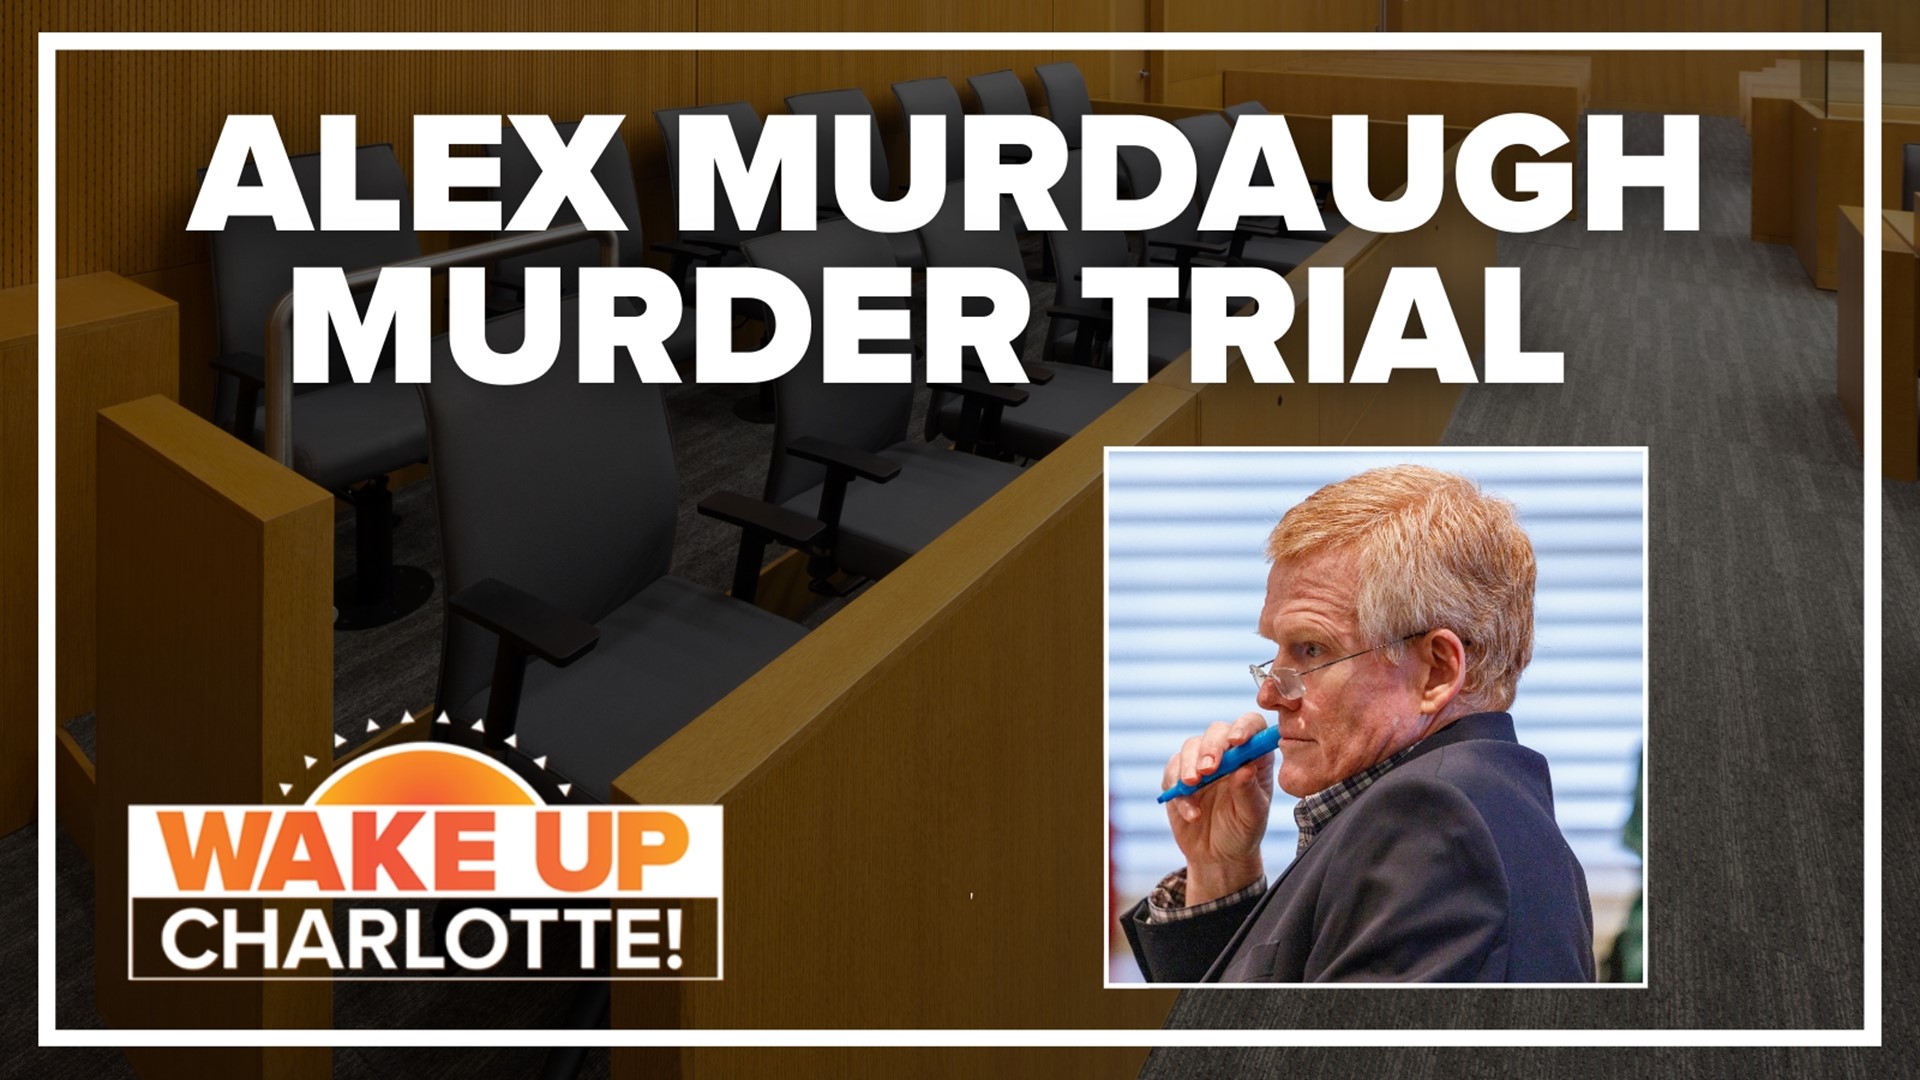 Defense attorneys want to limit testimony and expert opinion regarding blood spatter, firearms identification evidence as Alex Murdaugh case begins